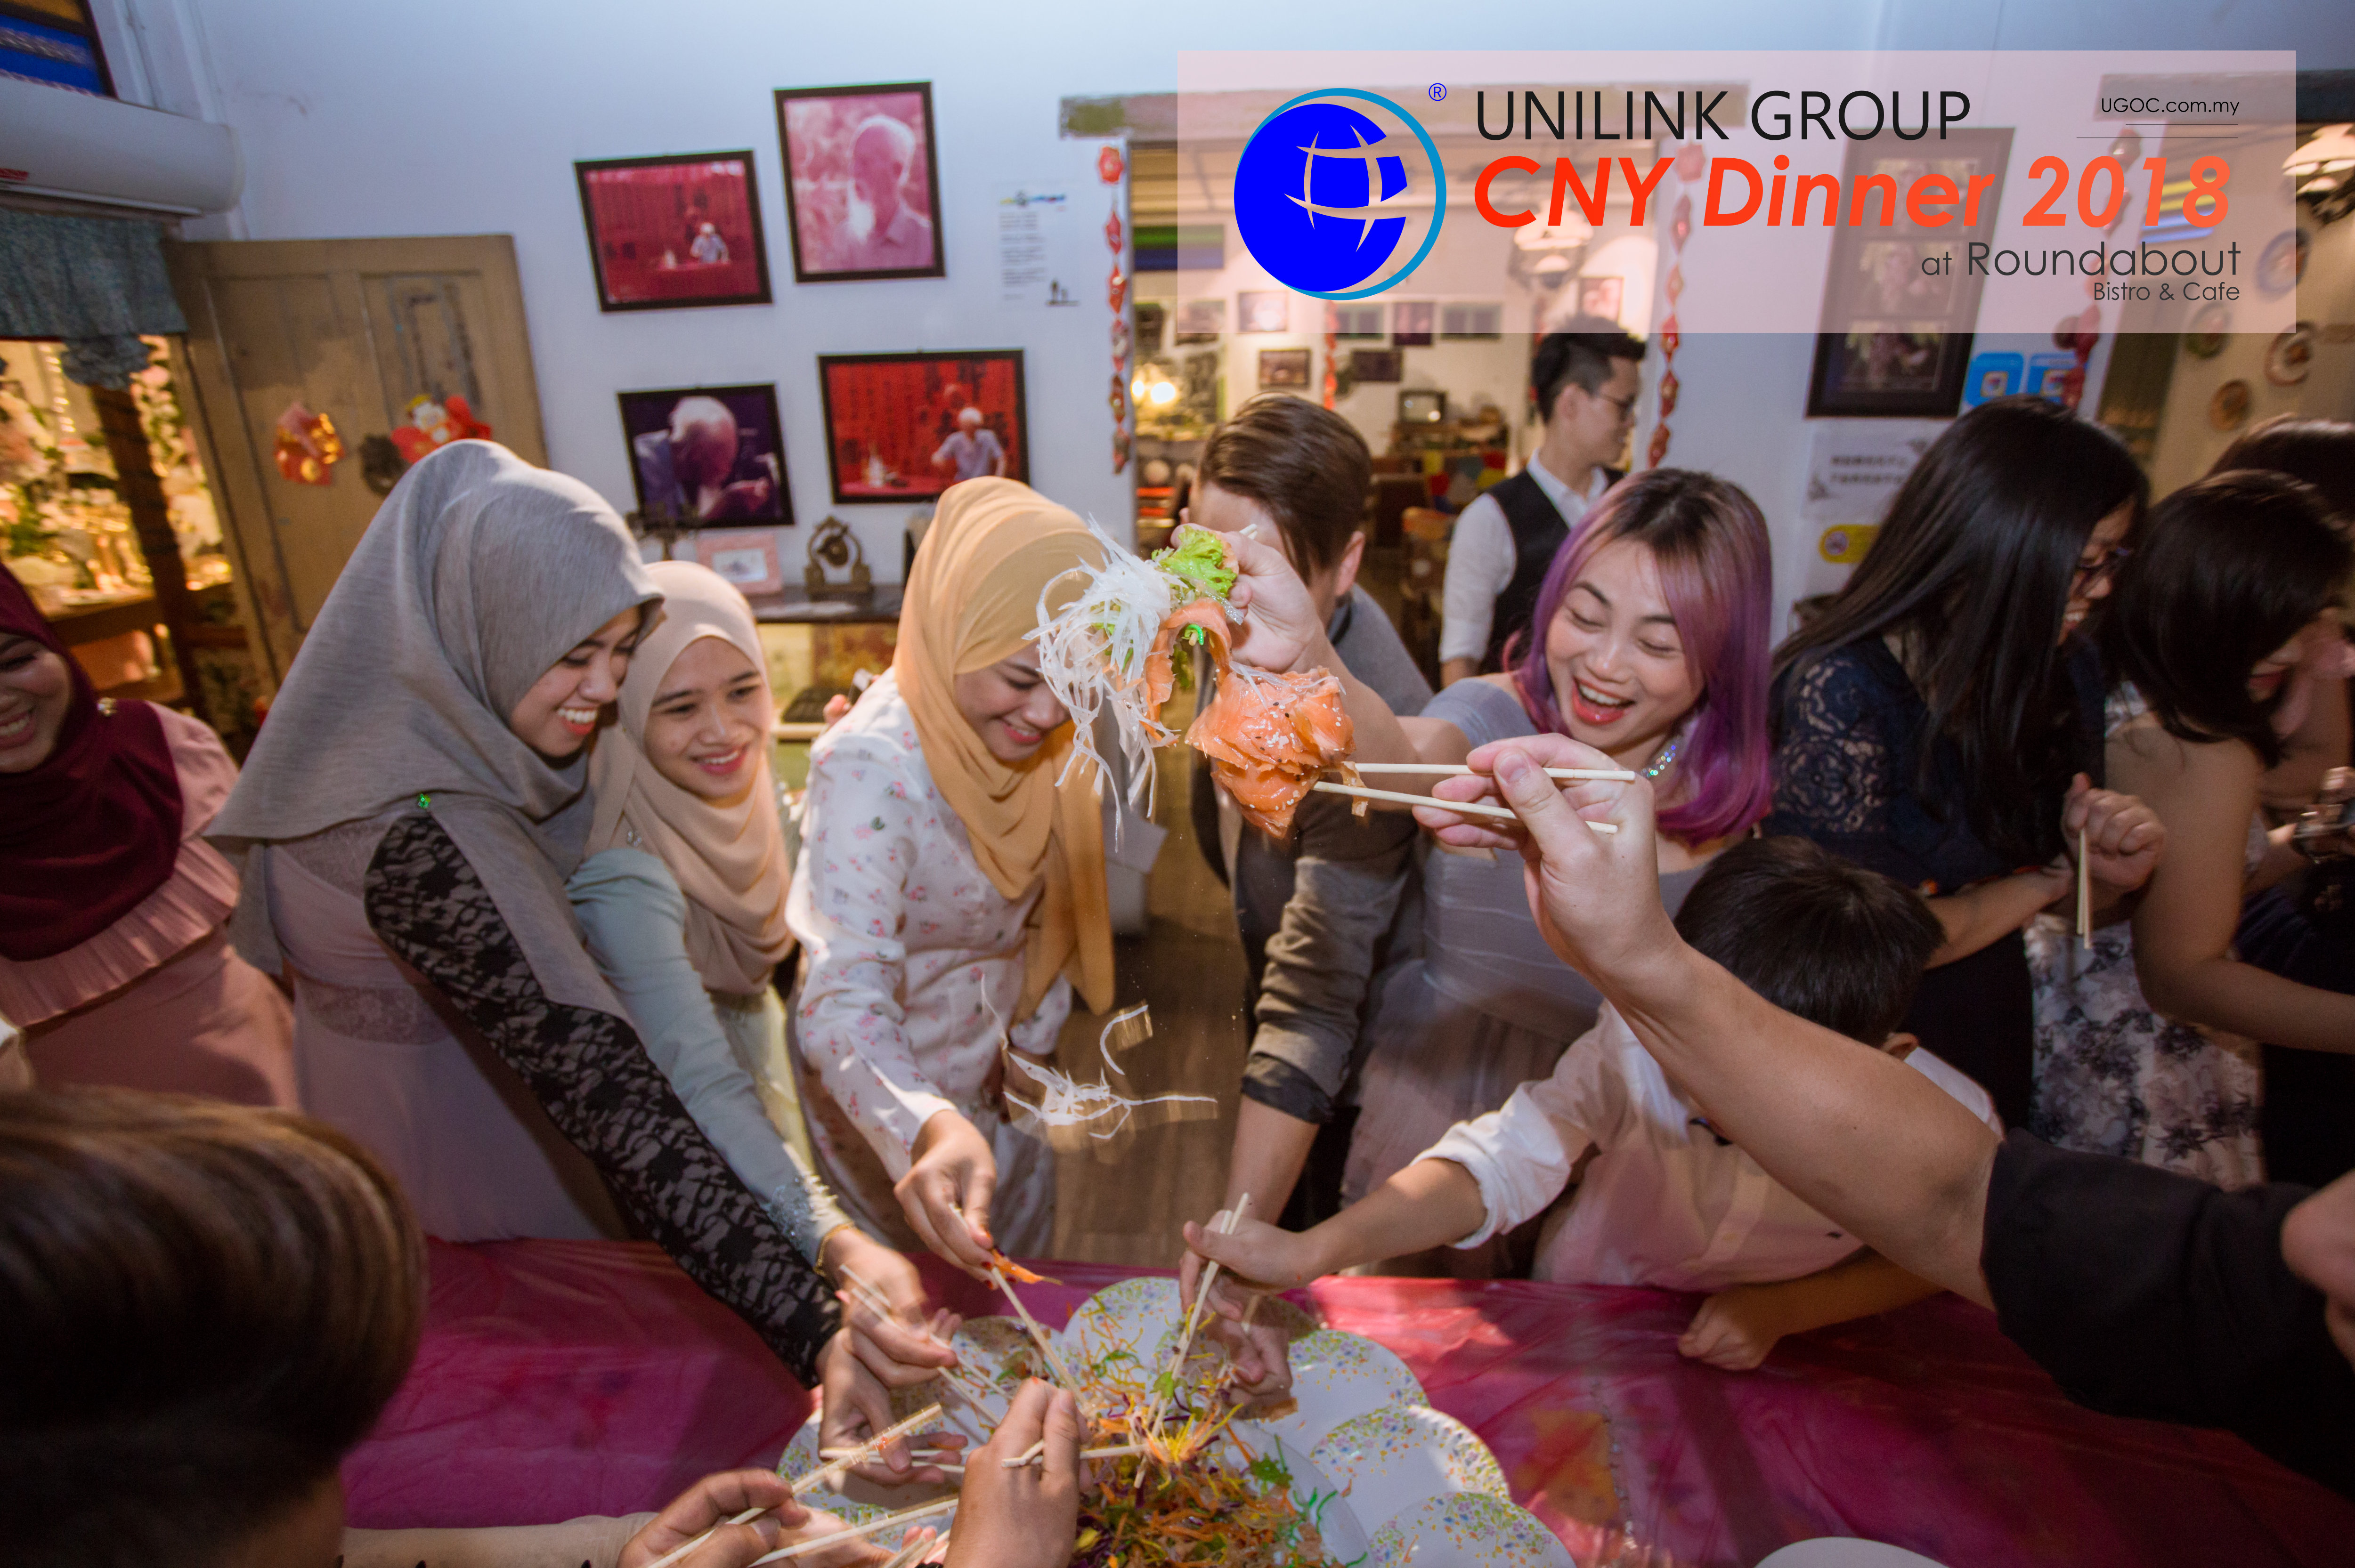 Unilink Group Chinese New Year Dinner 2018 from Agensi Pekerjaan Unilink Prospects Sdn Bhd at Roundabout Bisrto and Cafe 47